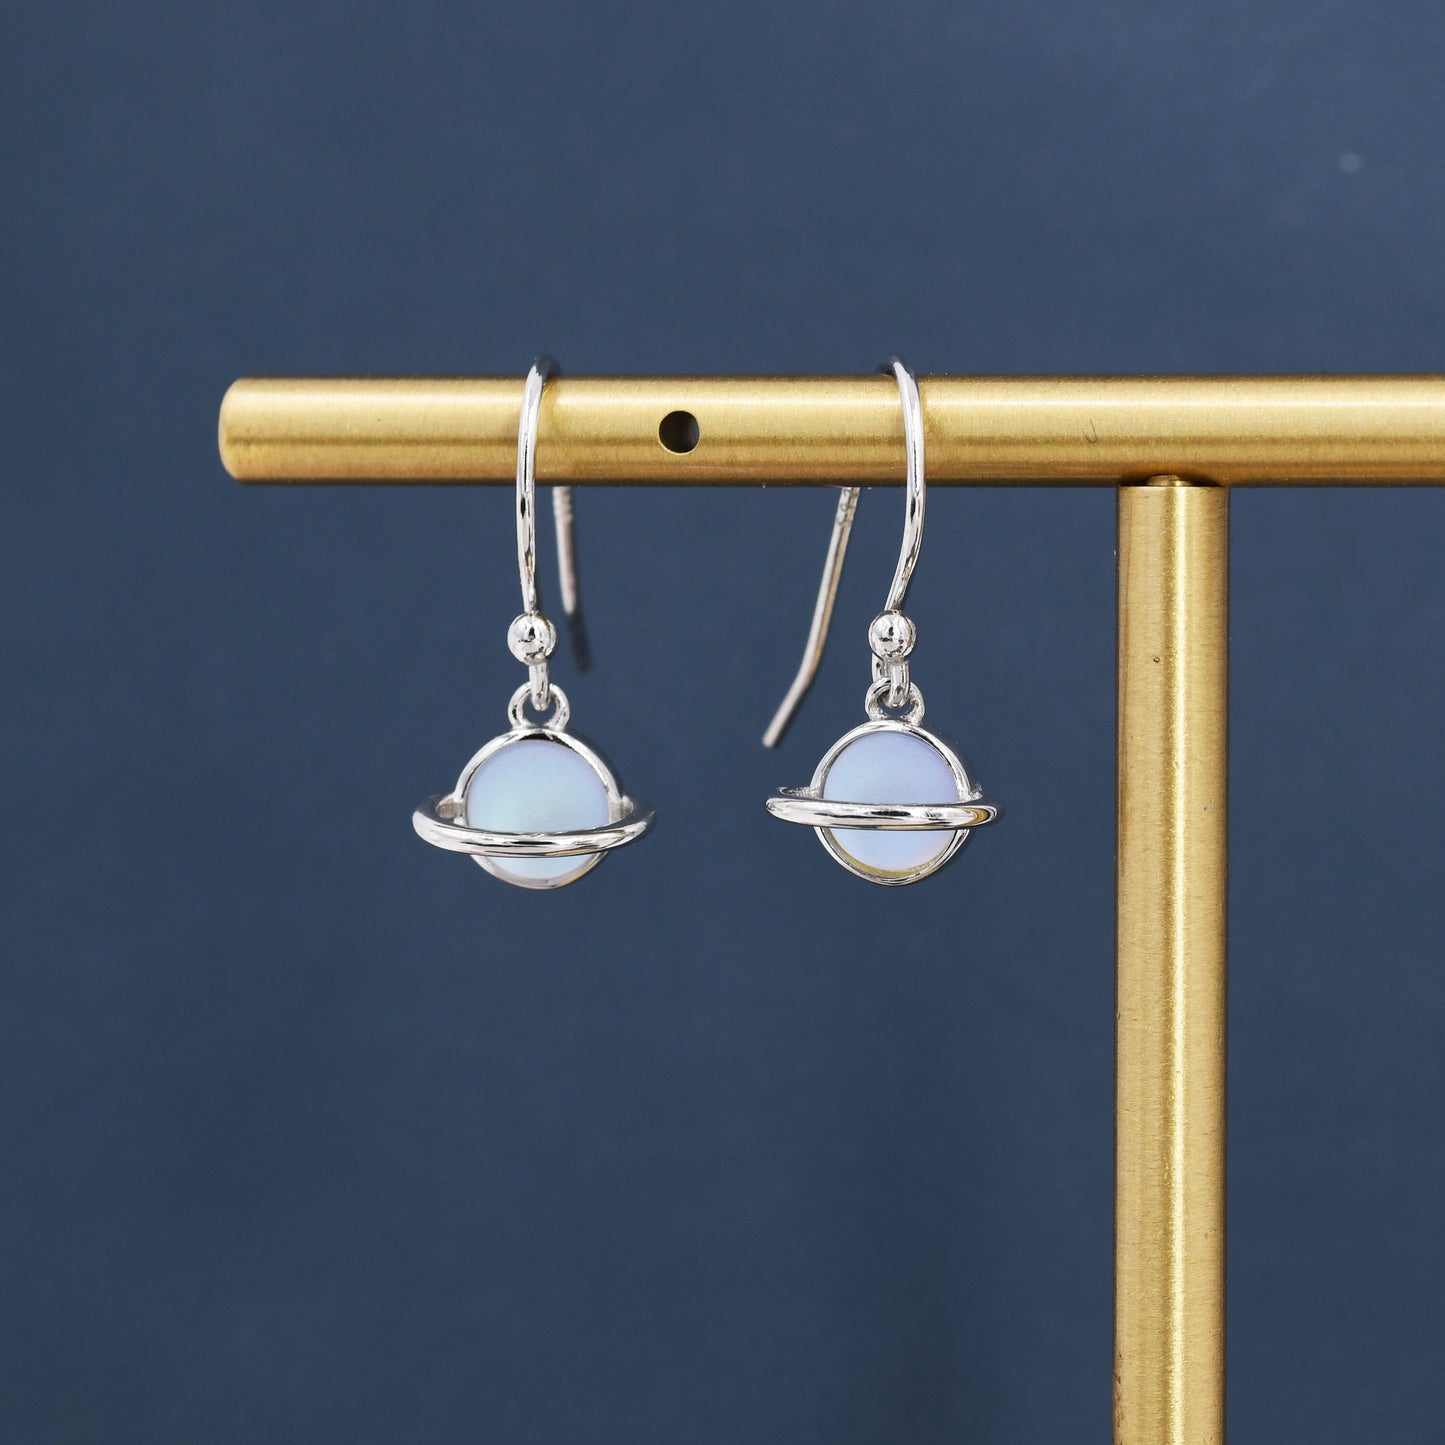 Little Planet Drop Hook Earrings in Sterling Silver - Simulated Moonstone,  Cute, Fun, Whimsical and Pretty